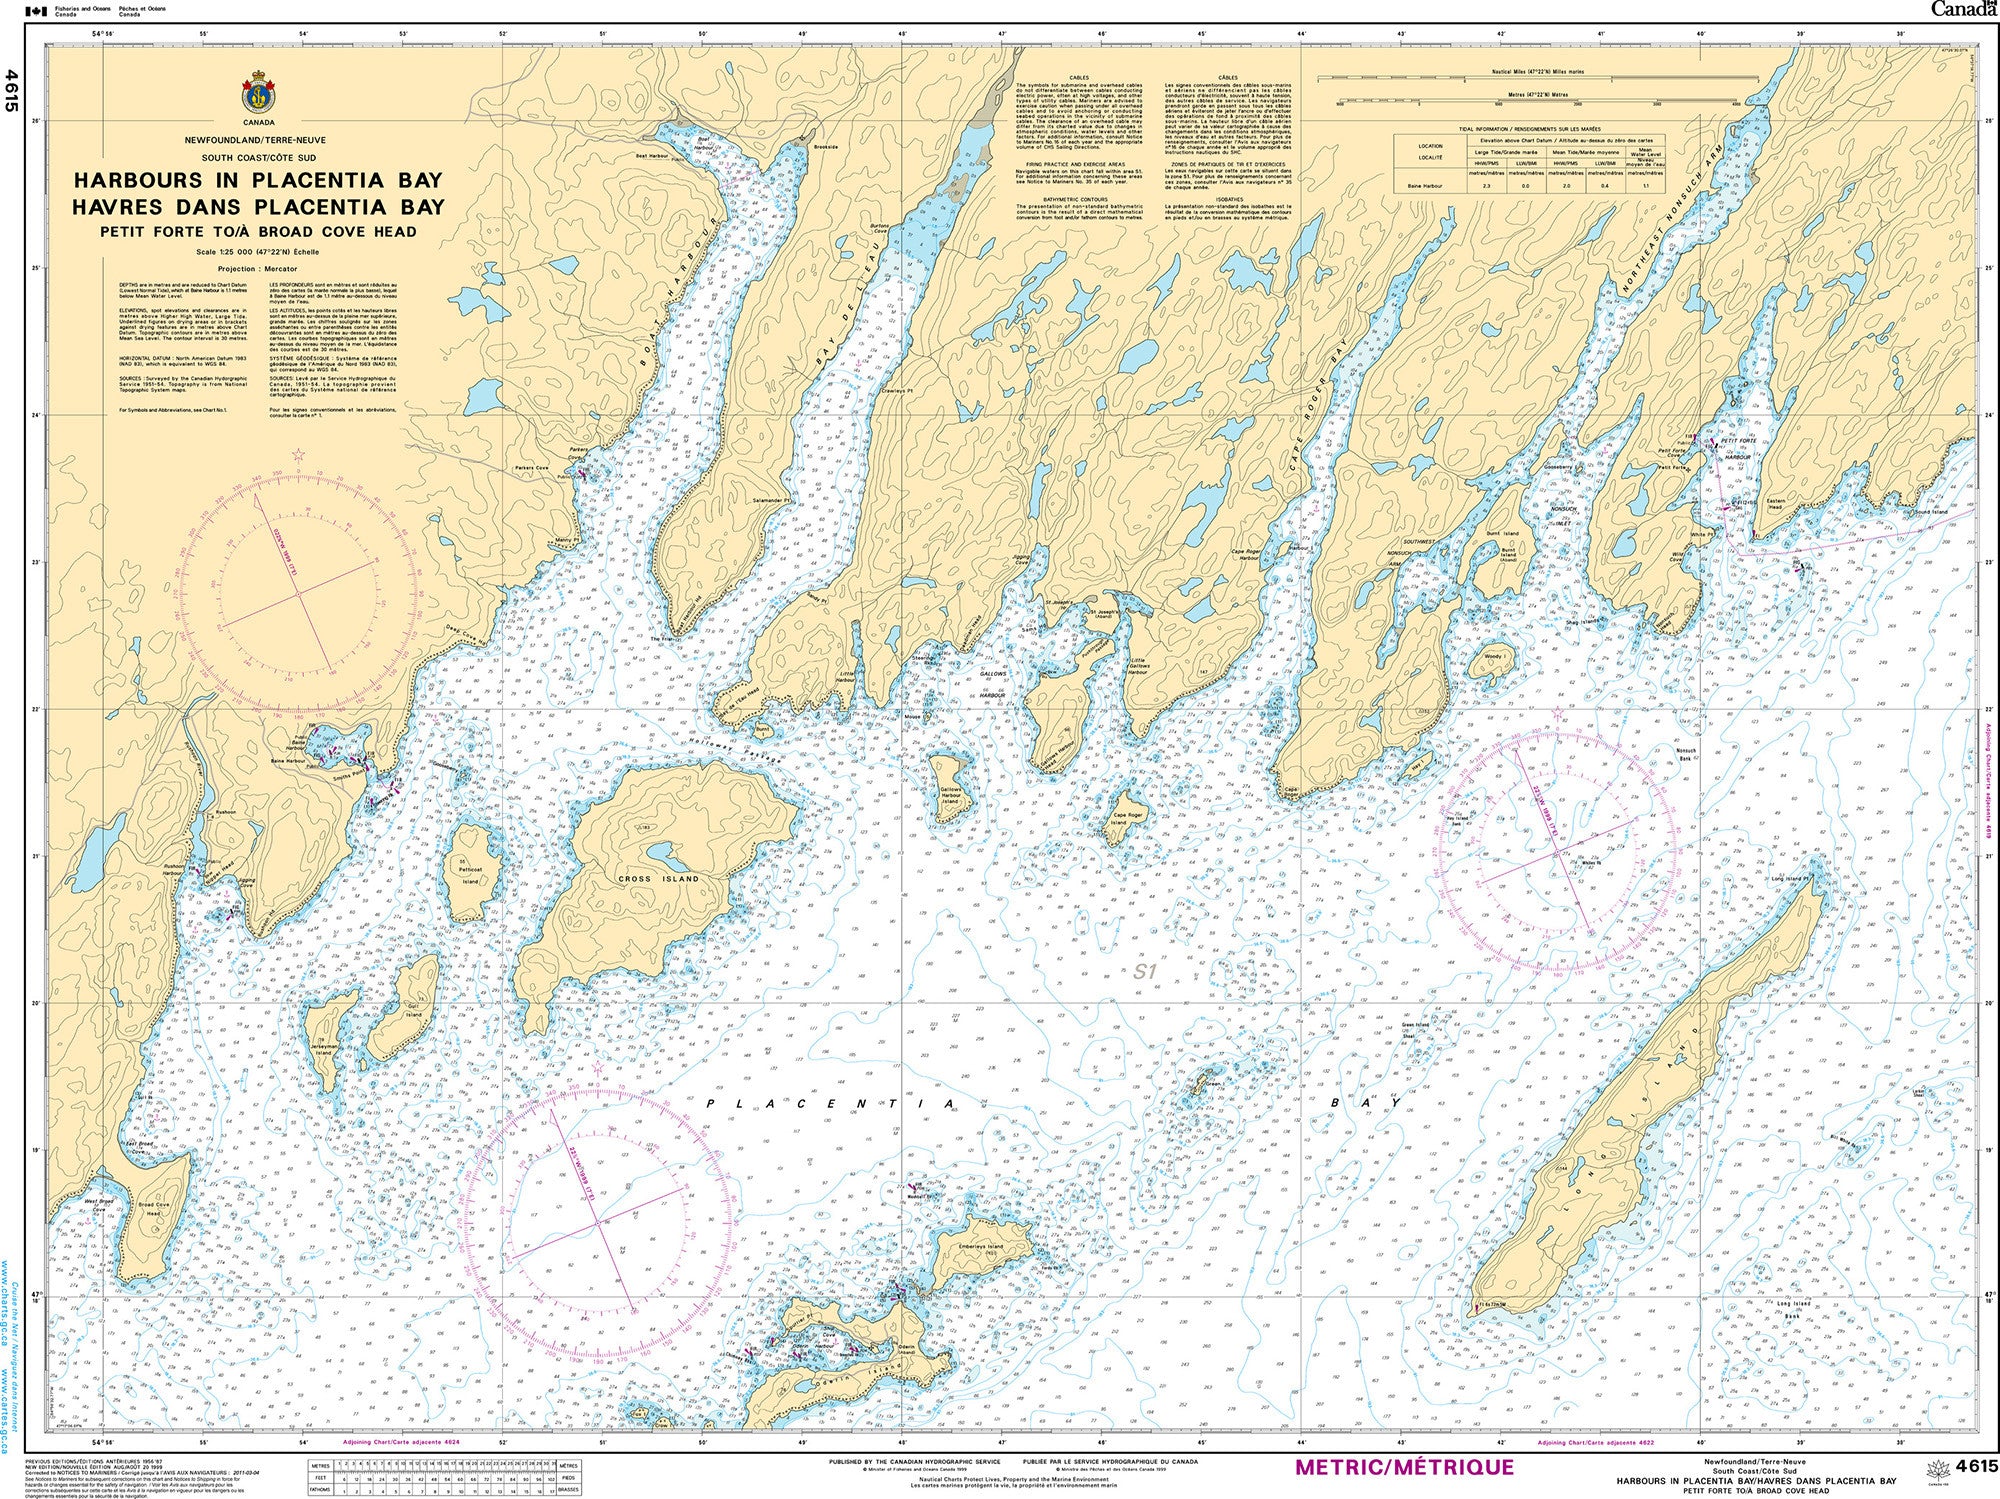 Canadian Hydrographic Service Nautical Chart CHS4615: Harbours in Placentia Bay Petite Forte to Broad Cove Head